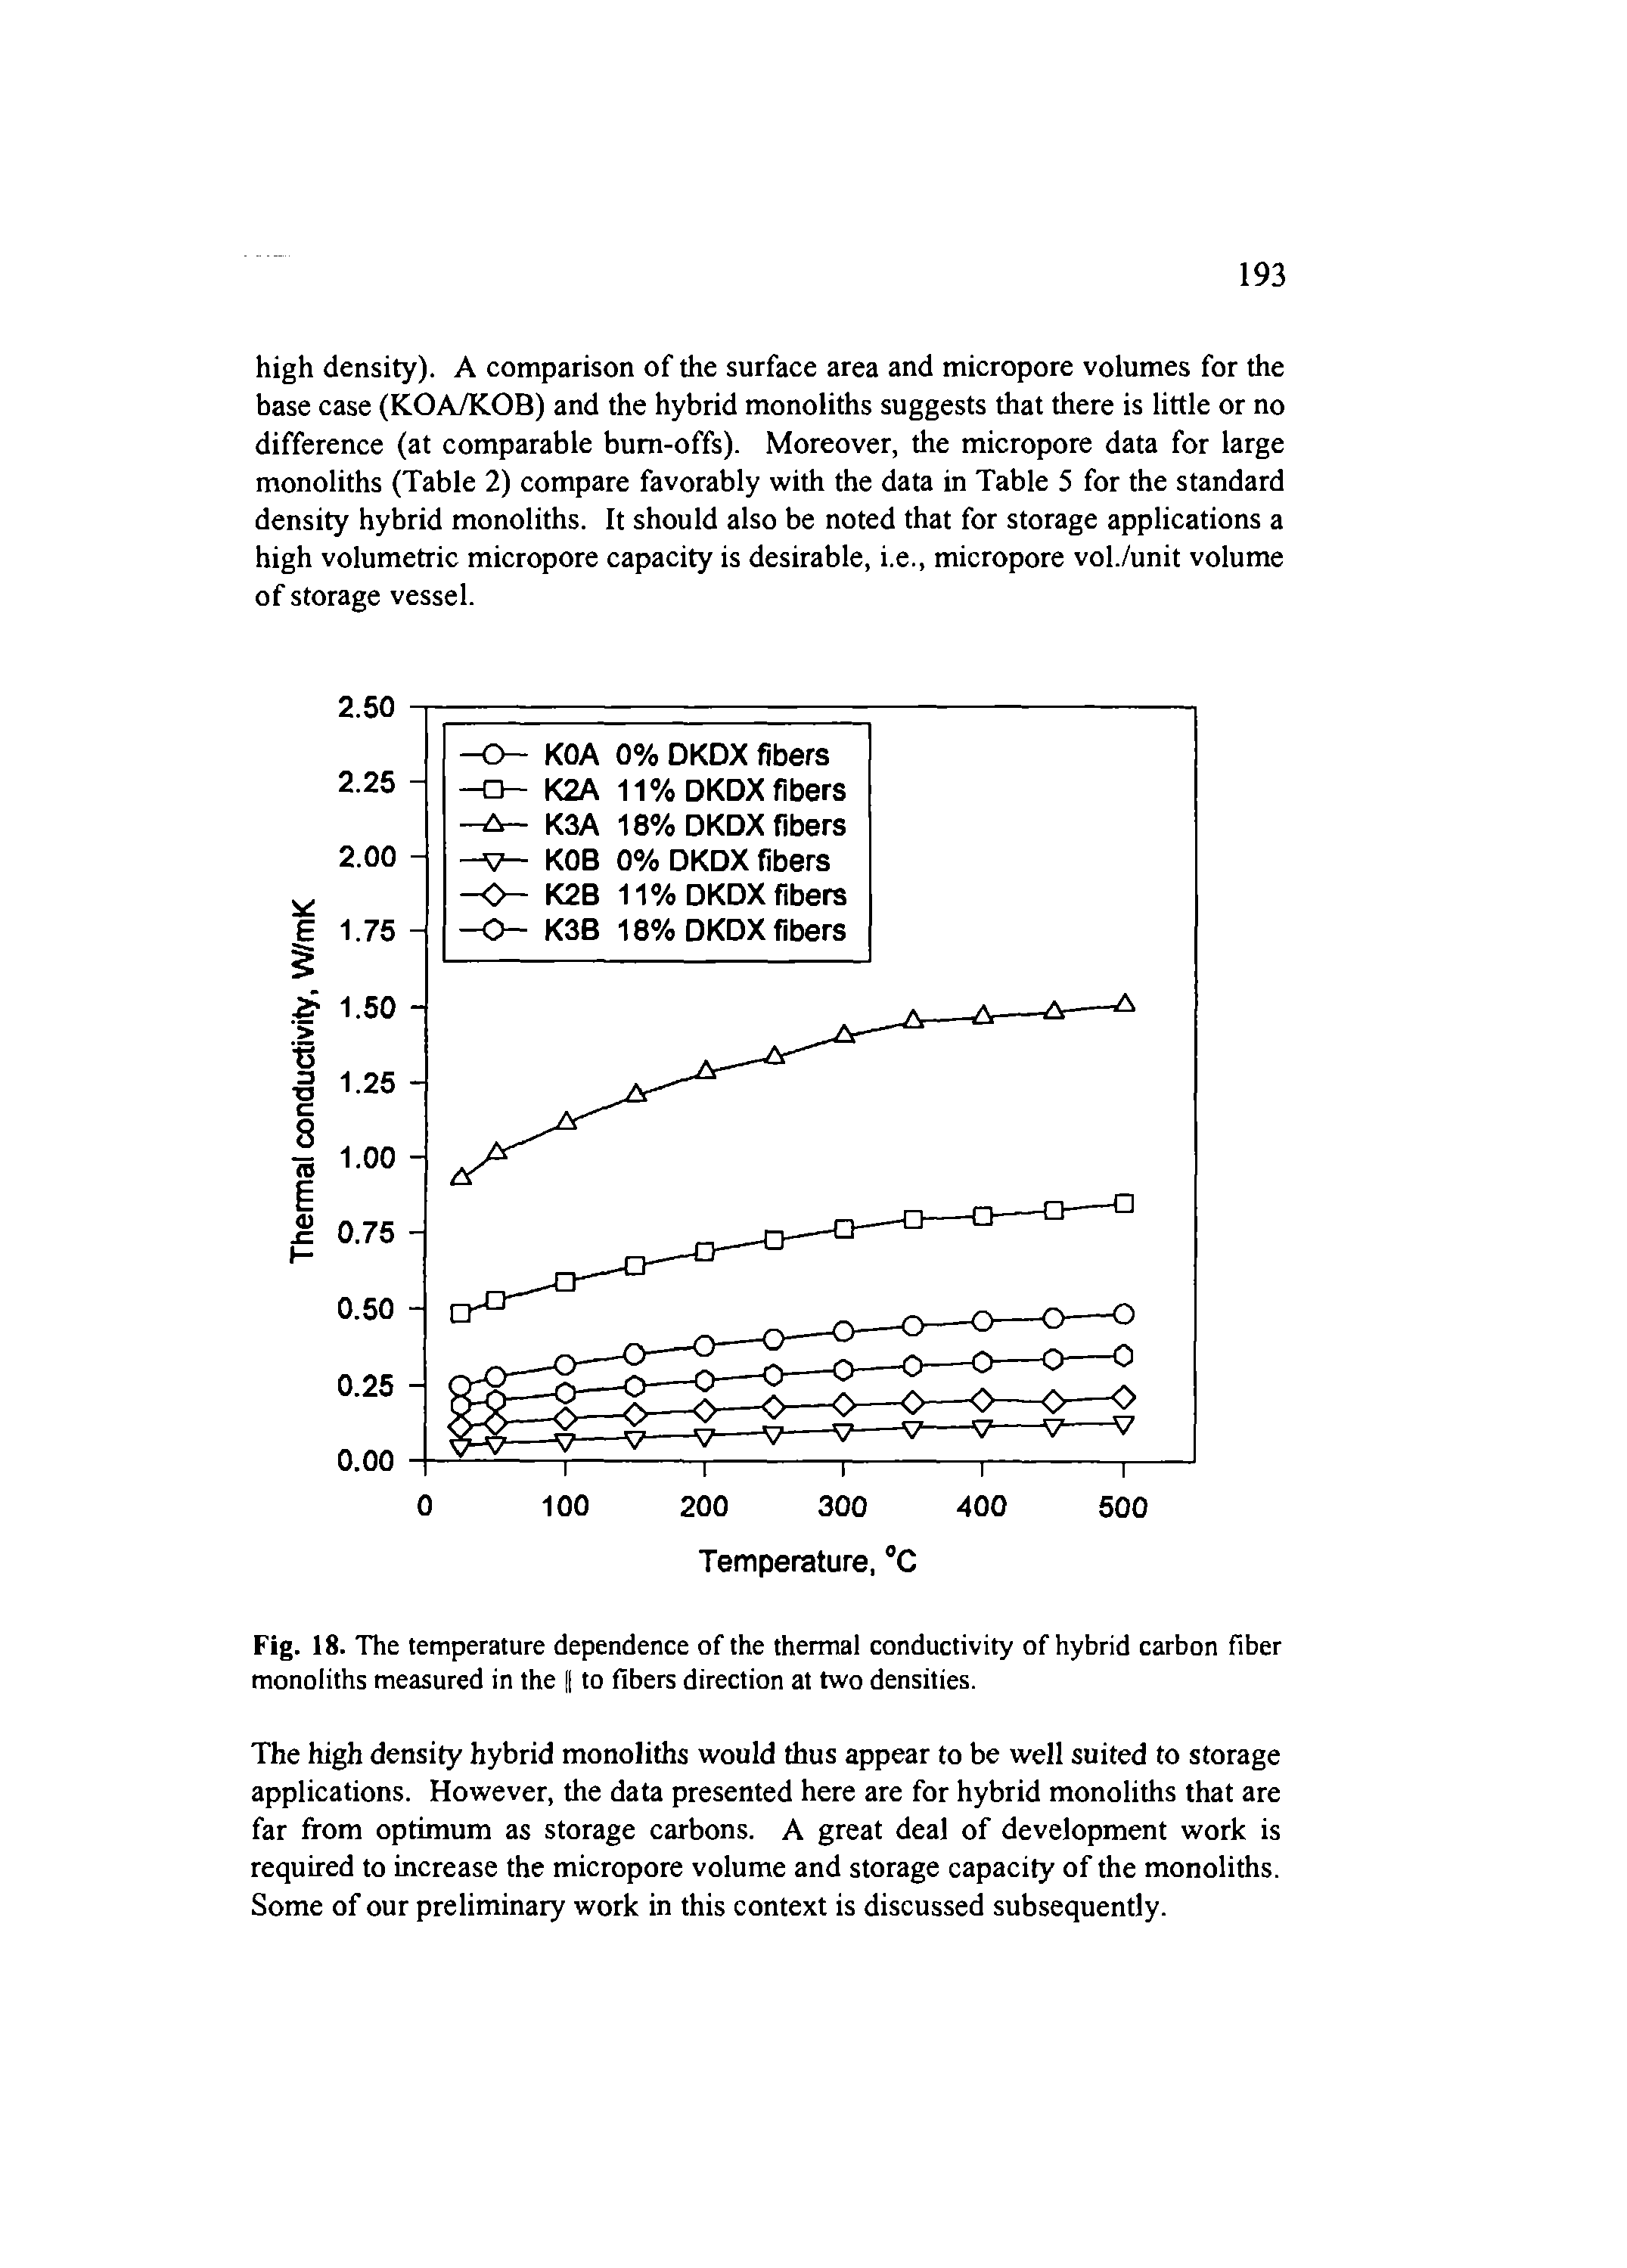 Fig. 18. The temperature dependence of the thermal conductivity of hybrid carbon fiber monoliths measured in the to fibers direction at two densities.